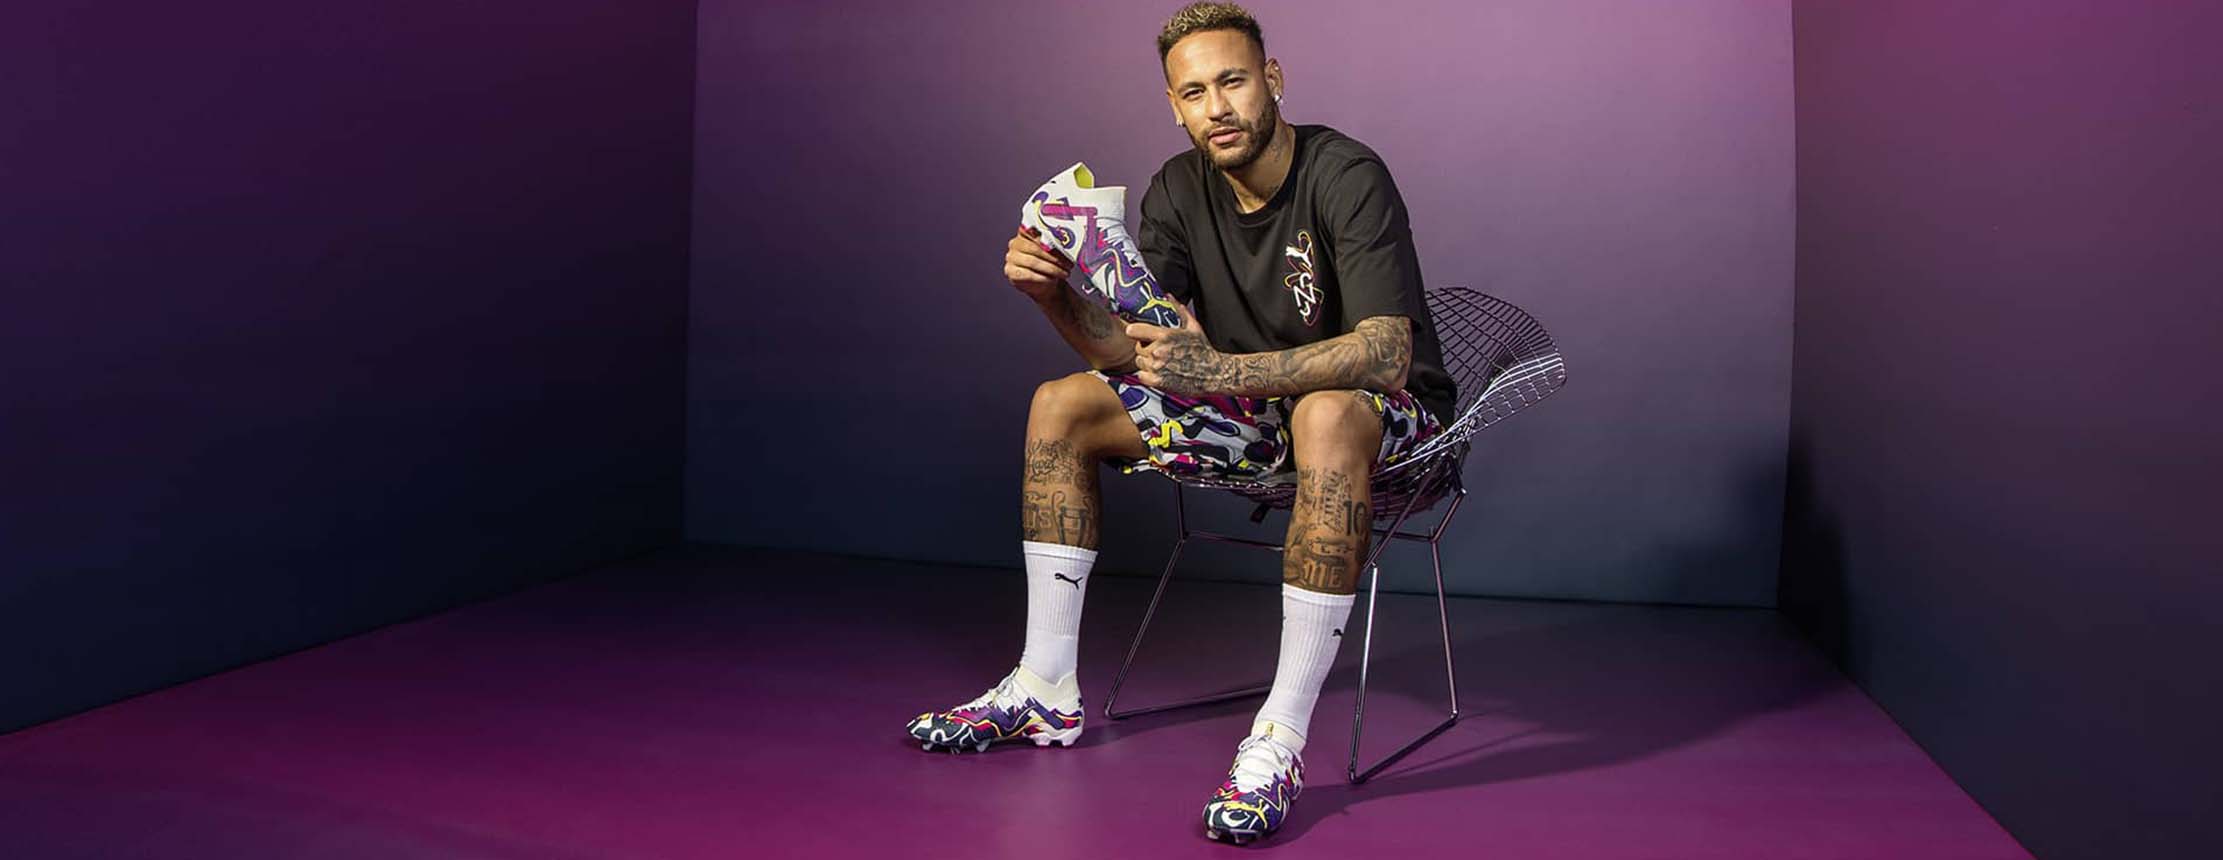 Find your flow with the neymar jr. Creativity pack